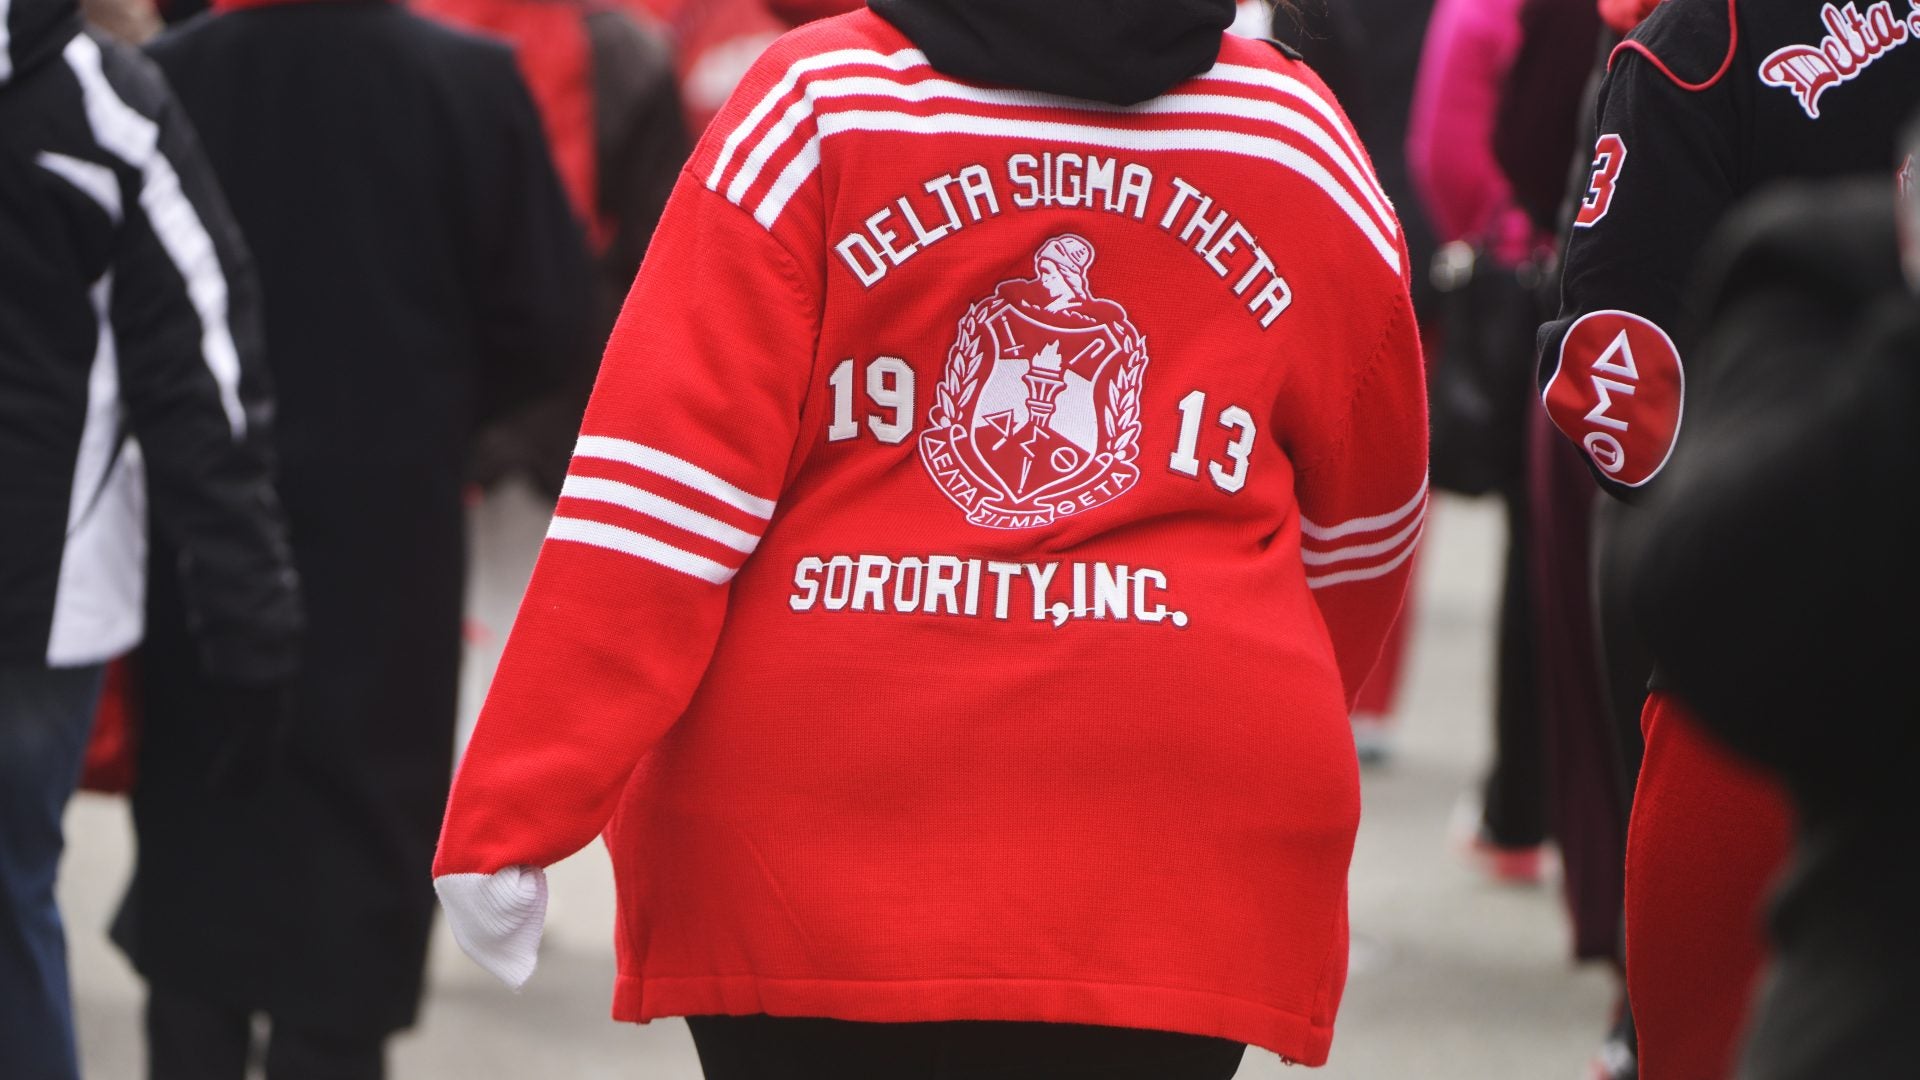 Calling All Divas of Delta Sigma Theta Sorority! Shop These Items To Celebrate Founders' Day!